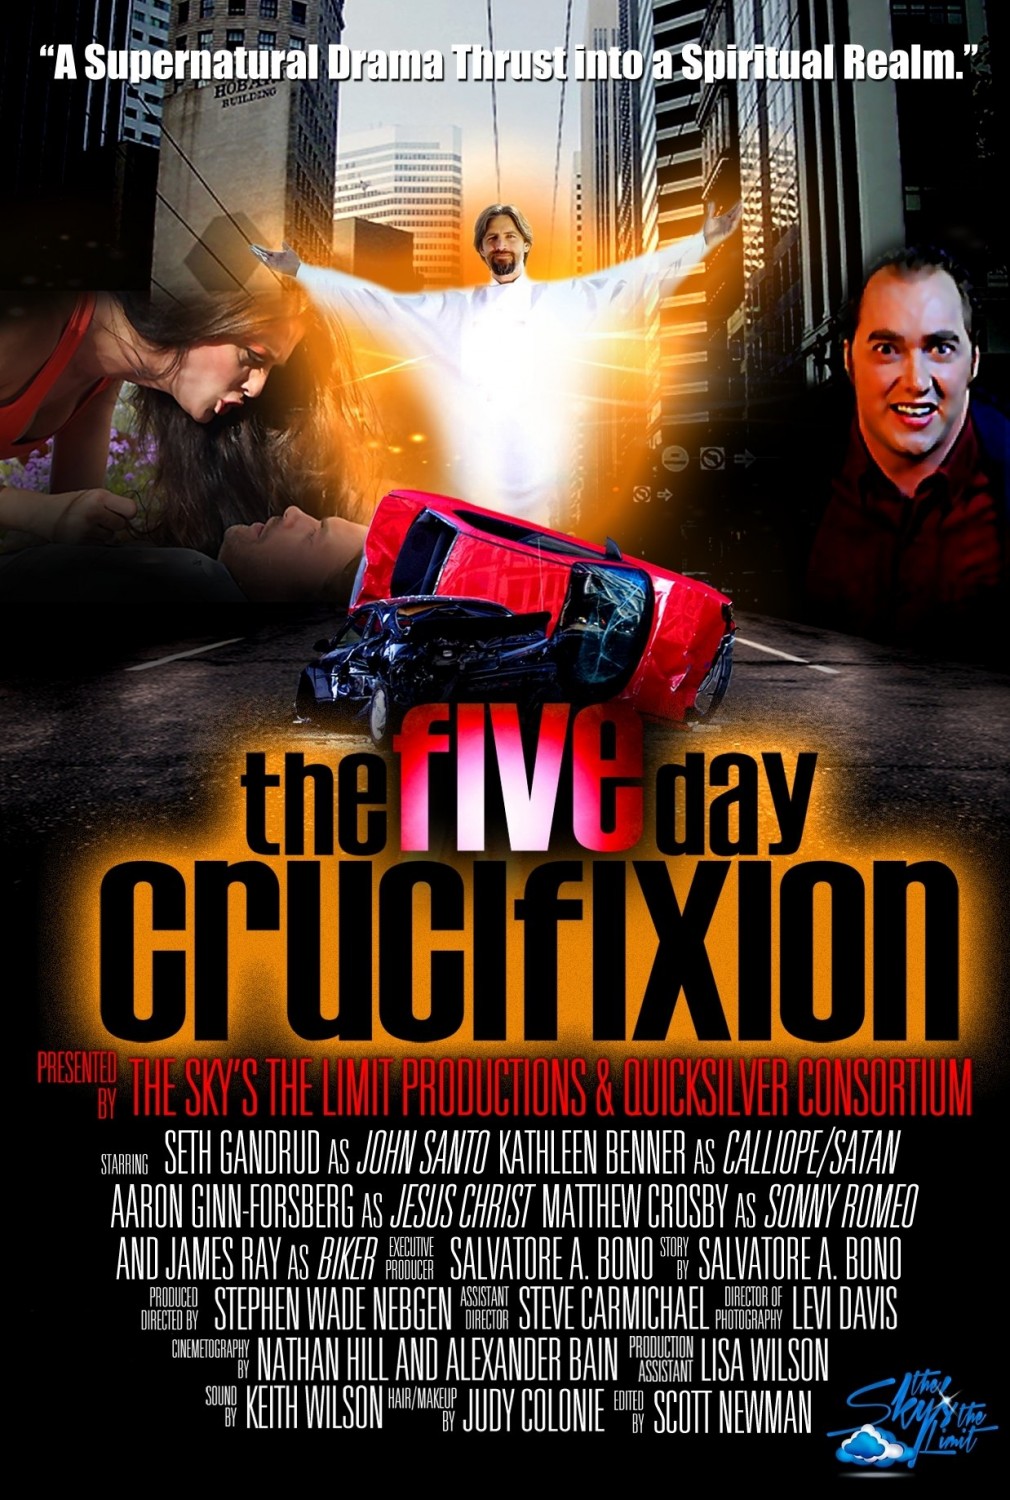 Extra Large Movie Poster Image for The Five Day Crucifixion